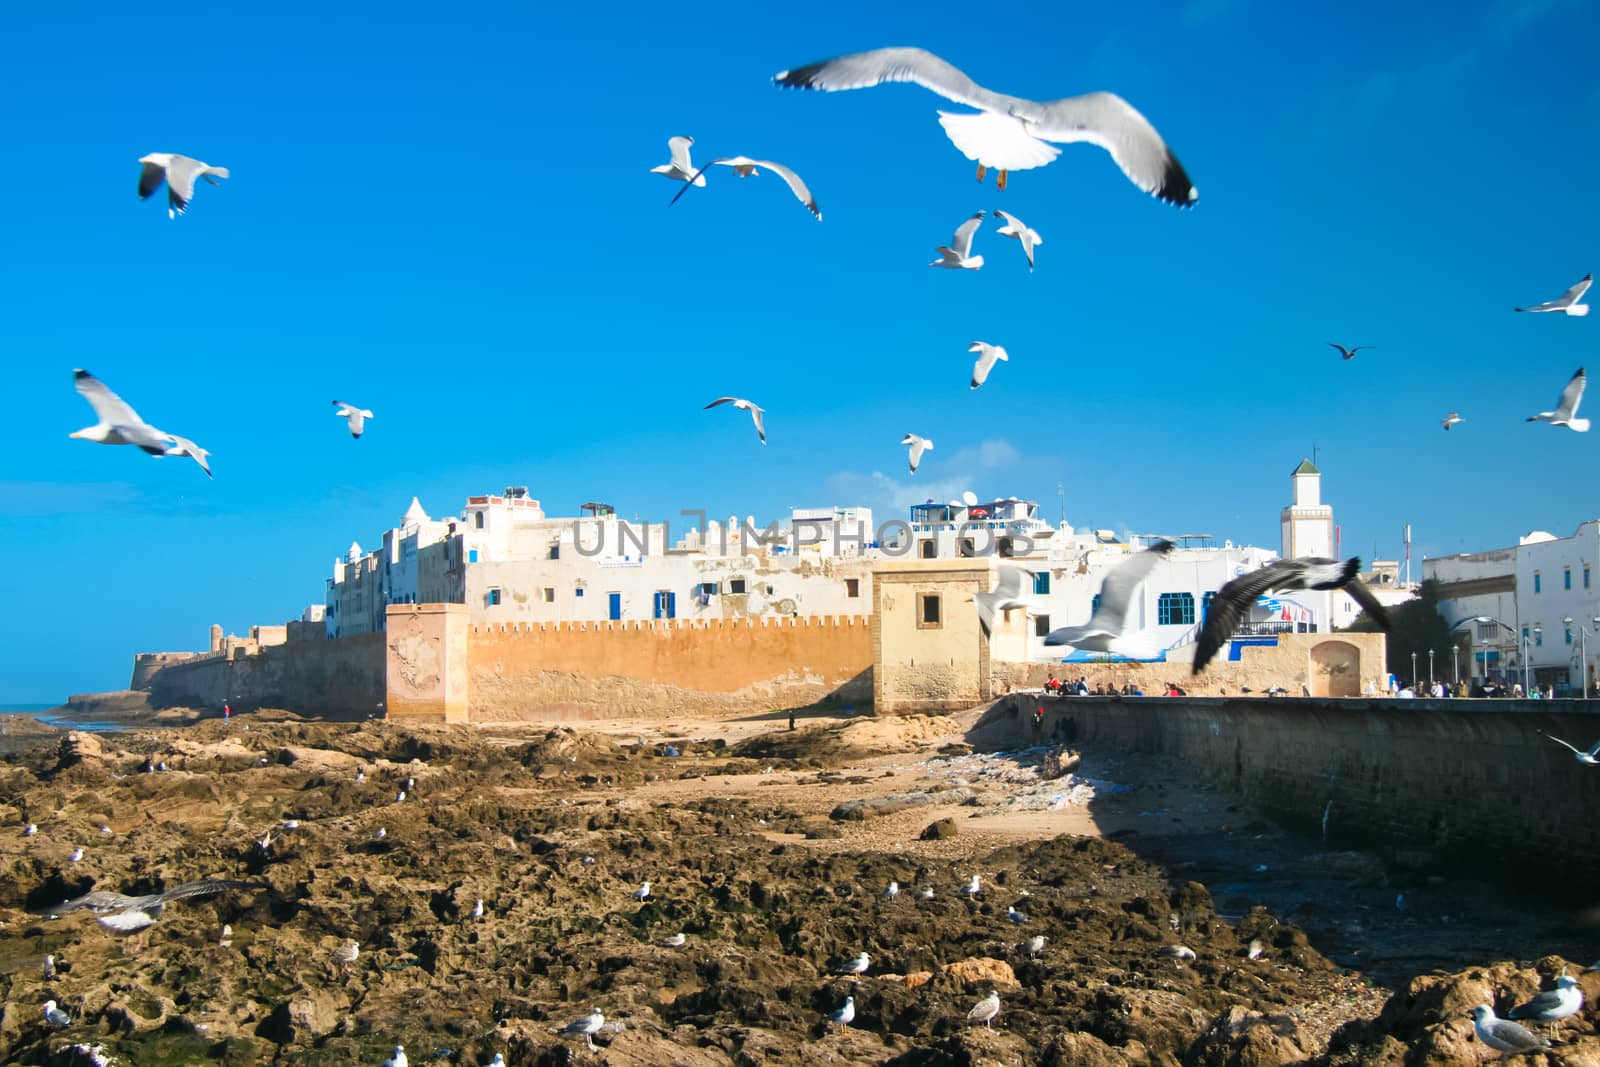 Essaouira is a city in the western Moroccan economic region of Marrakech-Tensift-Al Haouz, on the Atlantic coast. Since the 16th century, the city has also been known by its Portuguese name of Mogador or Mogadore. Morocco, north Africa.